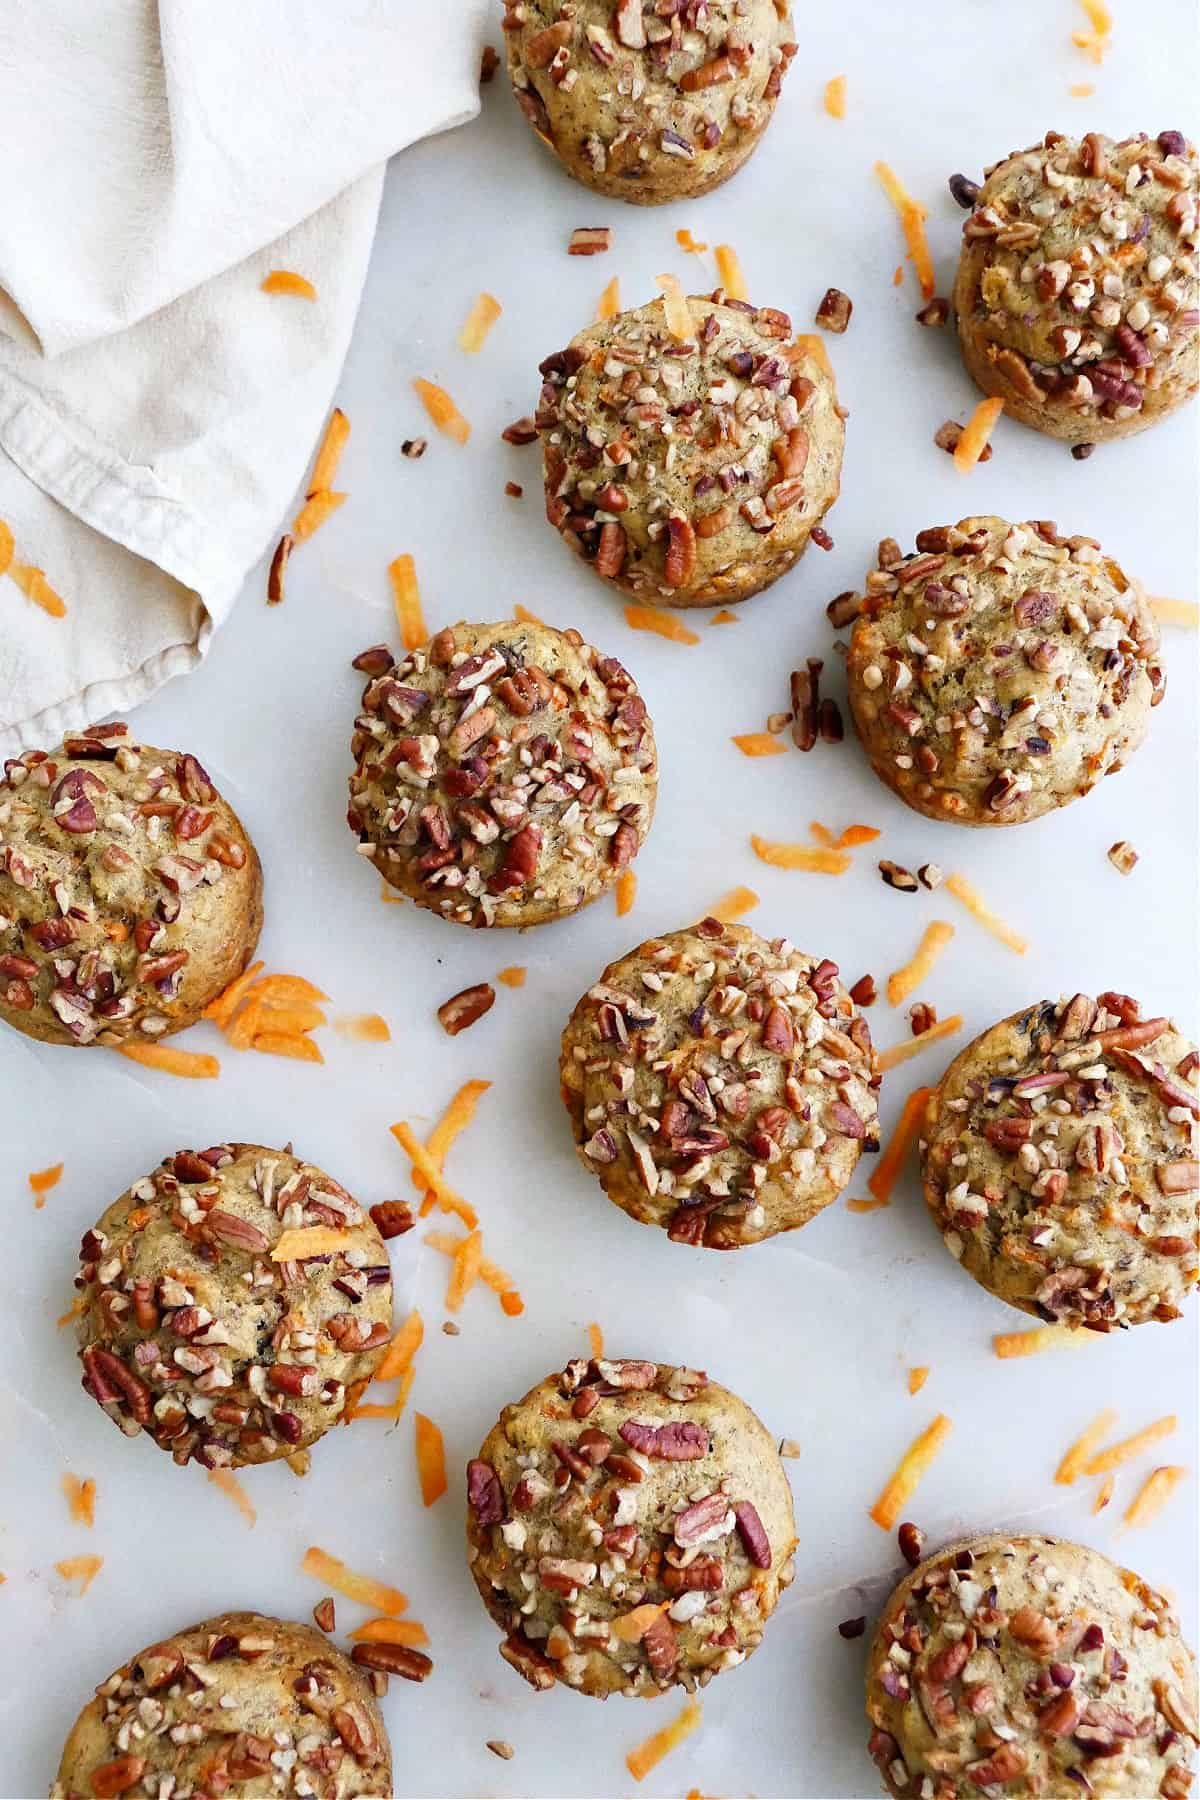 12 banana carrot muffins spread out on a counter with pecans and shredded carrots